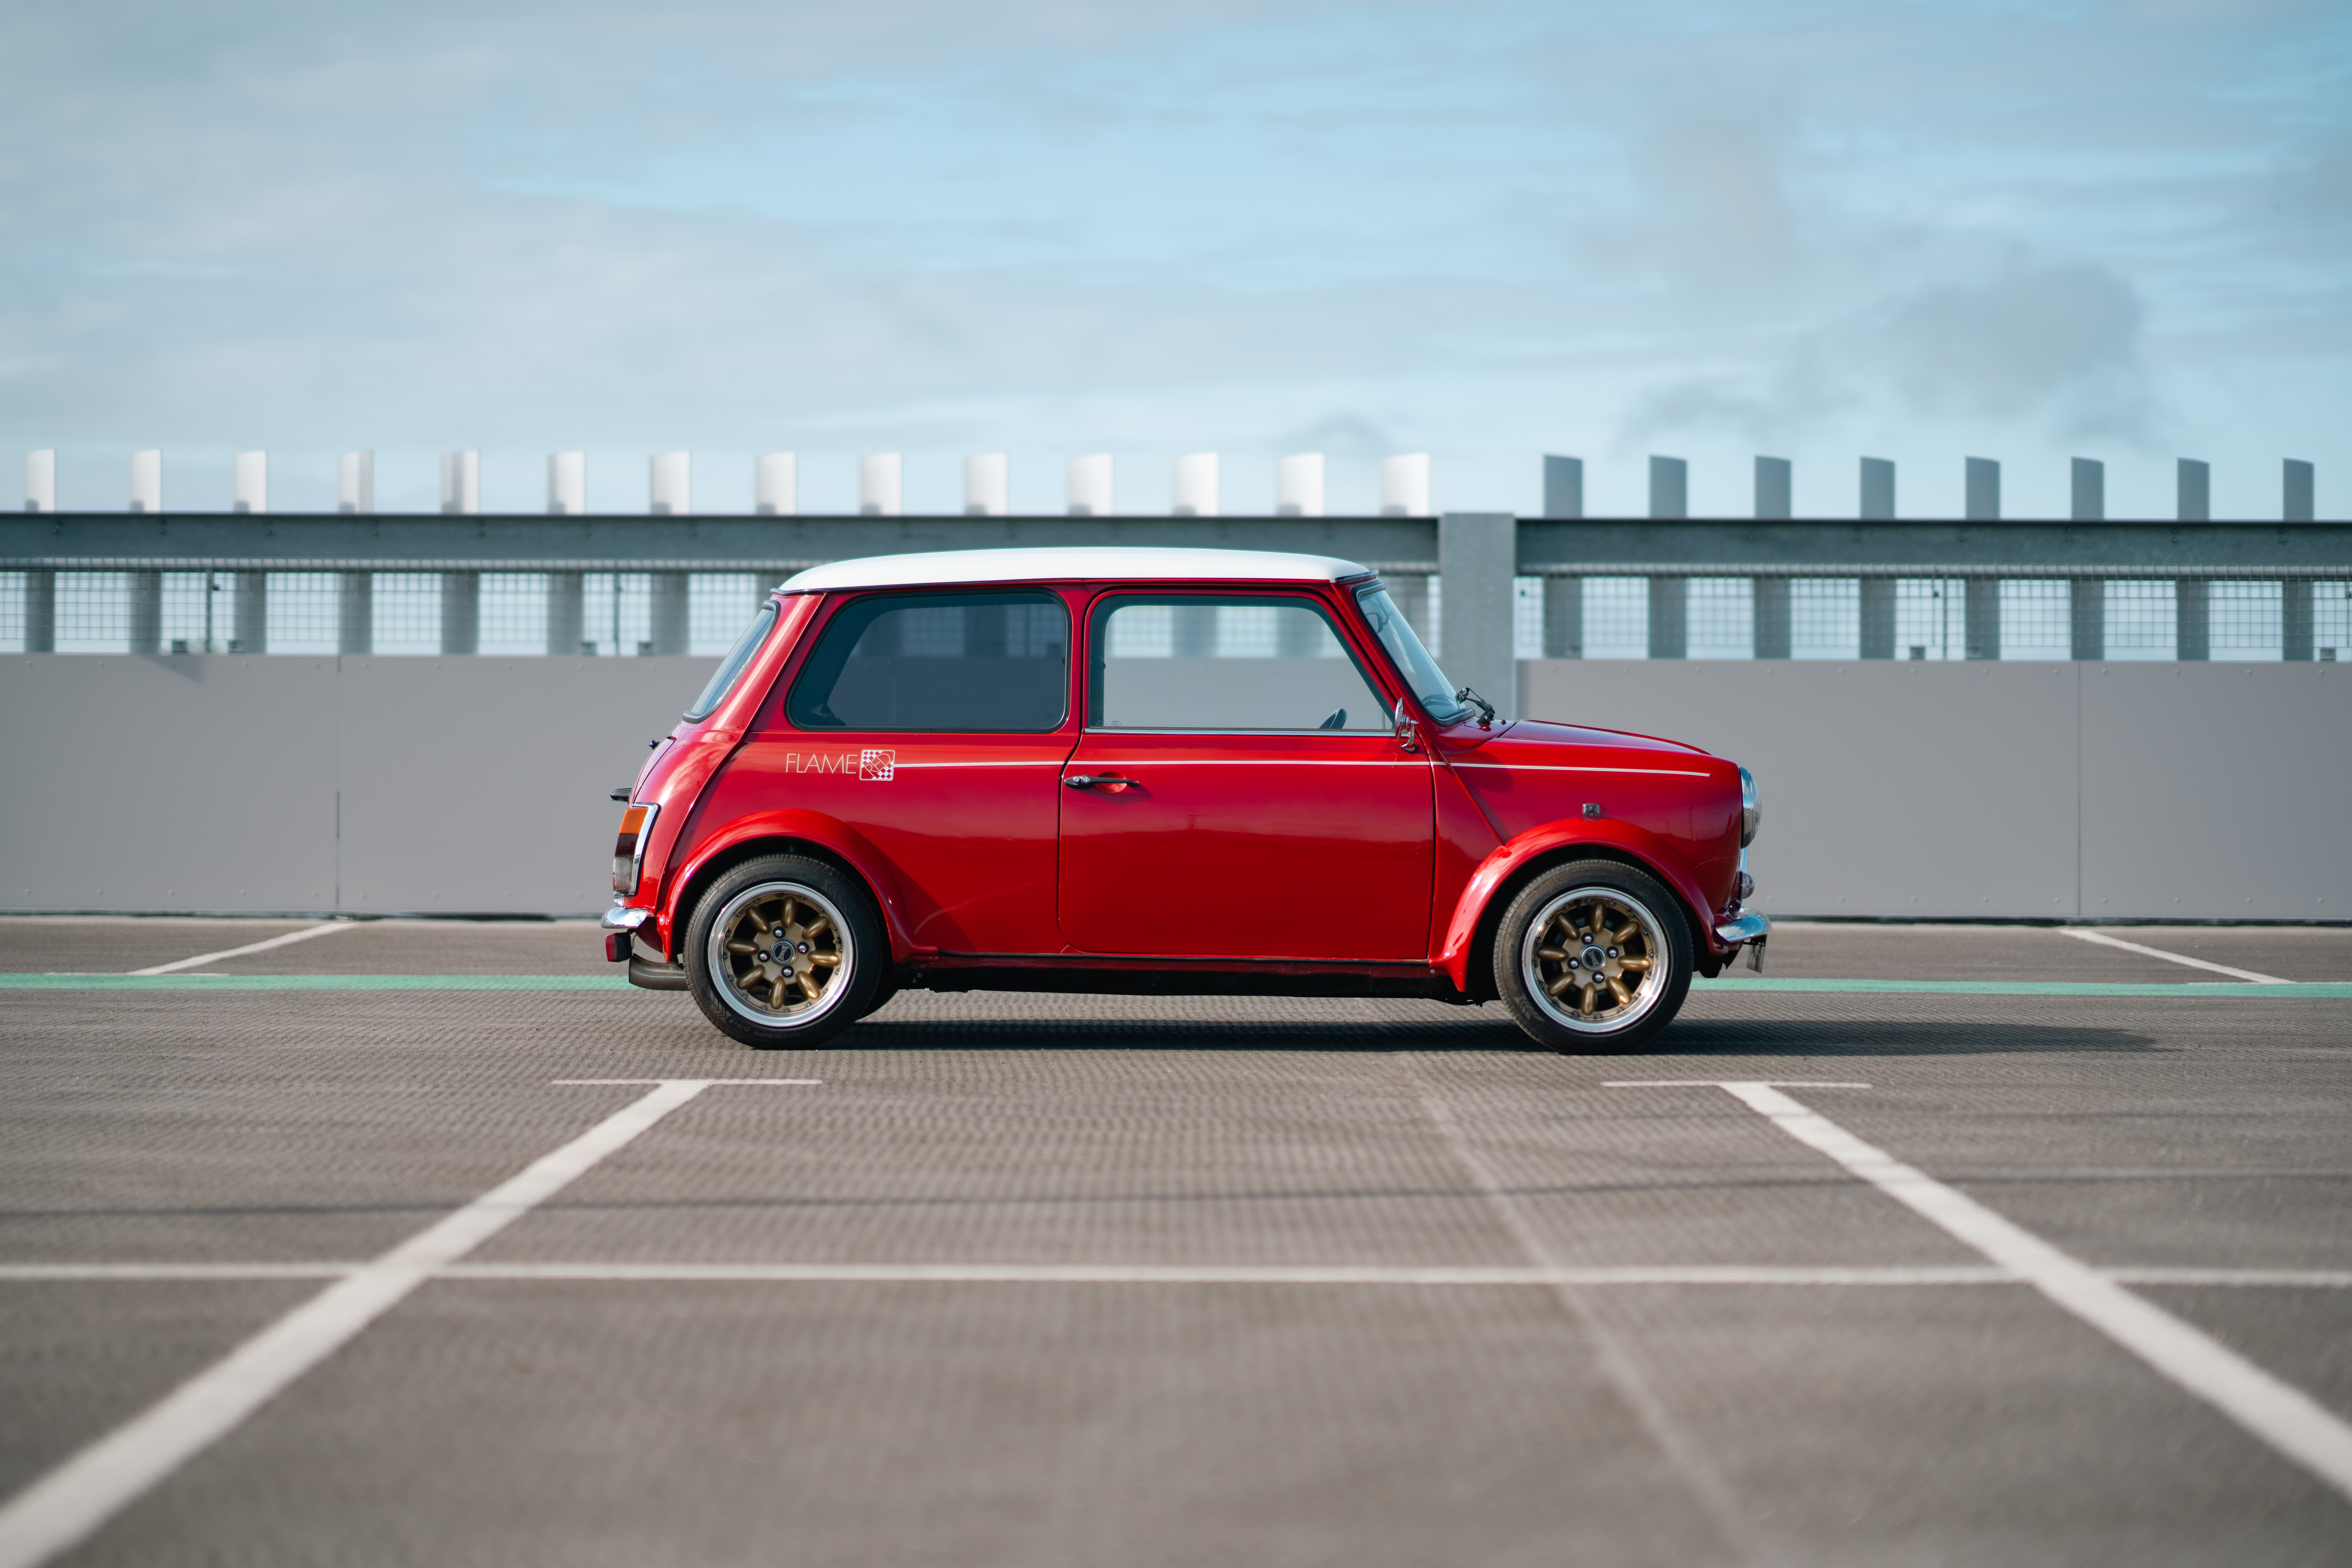 1990 ROVER MINI COOPER - FLAME EDITION for sale by auction in 